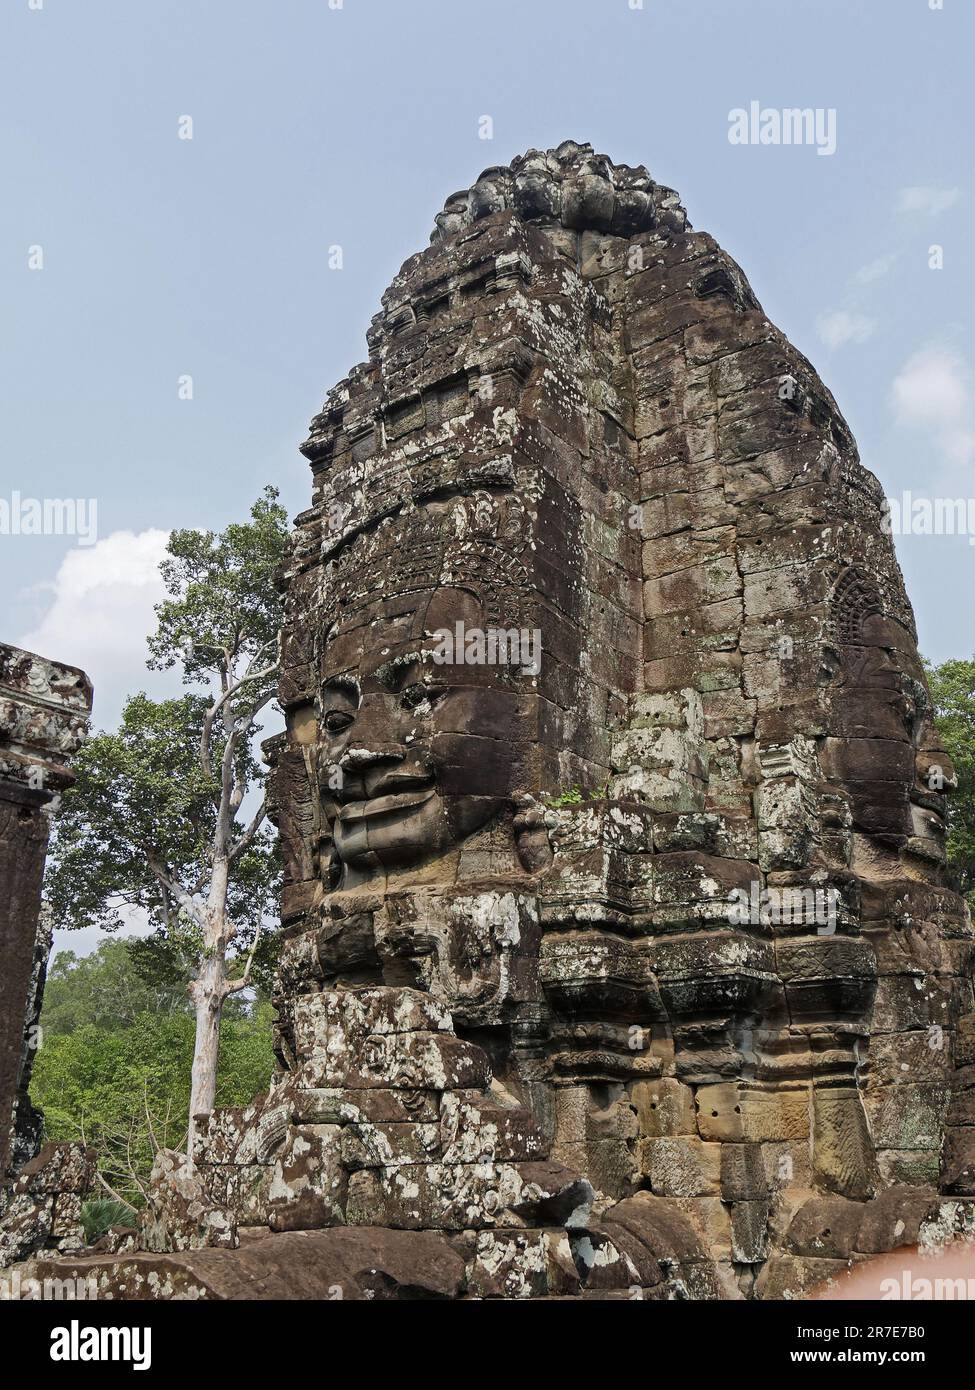 BayonTemple, Siem Reap Province, Angkor's Temple Complex Site listed as World Heritage by Unesco in 1192, built by King Jayavarman VII between XIIth a Stock Photo